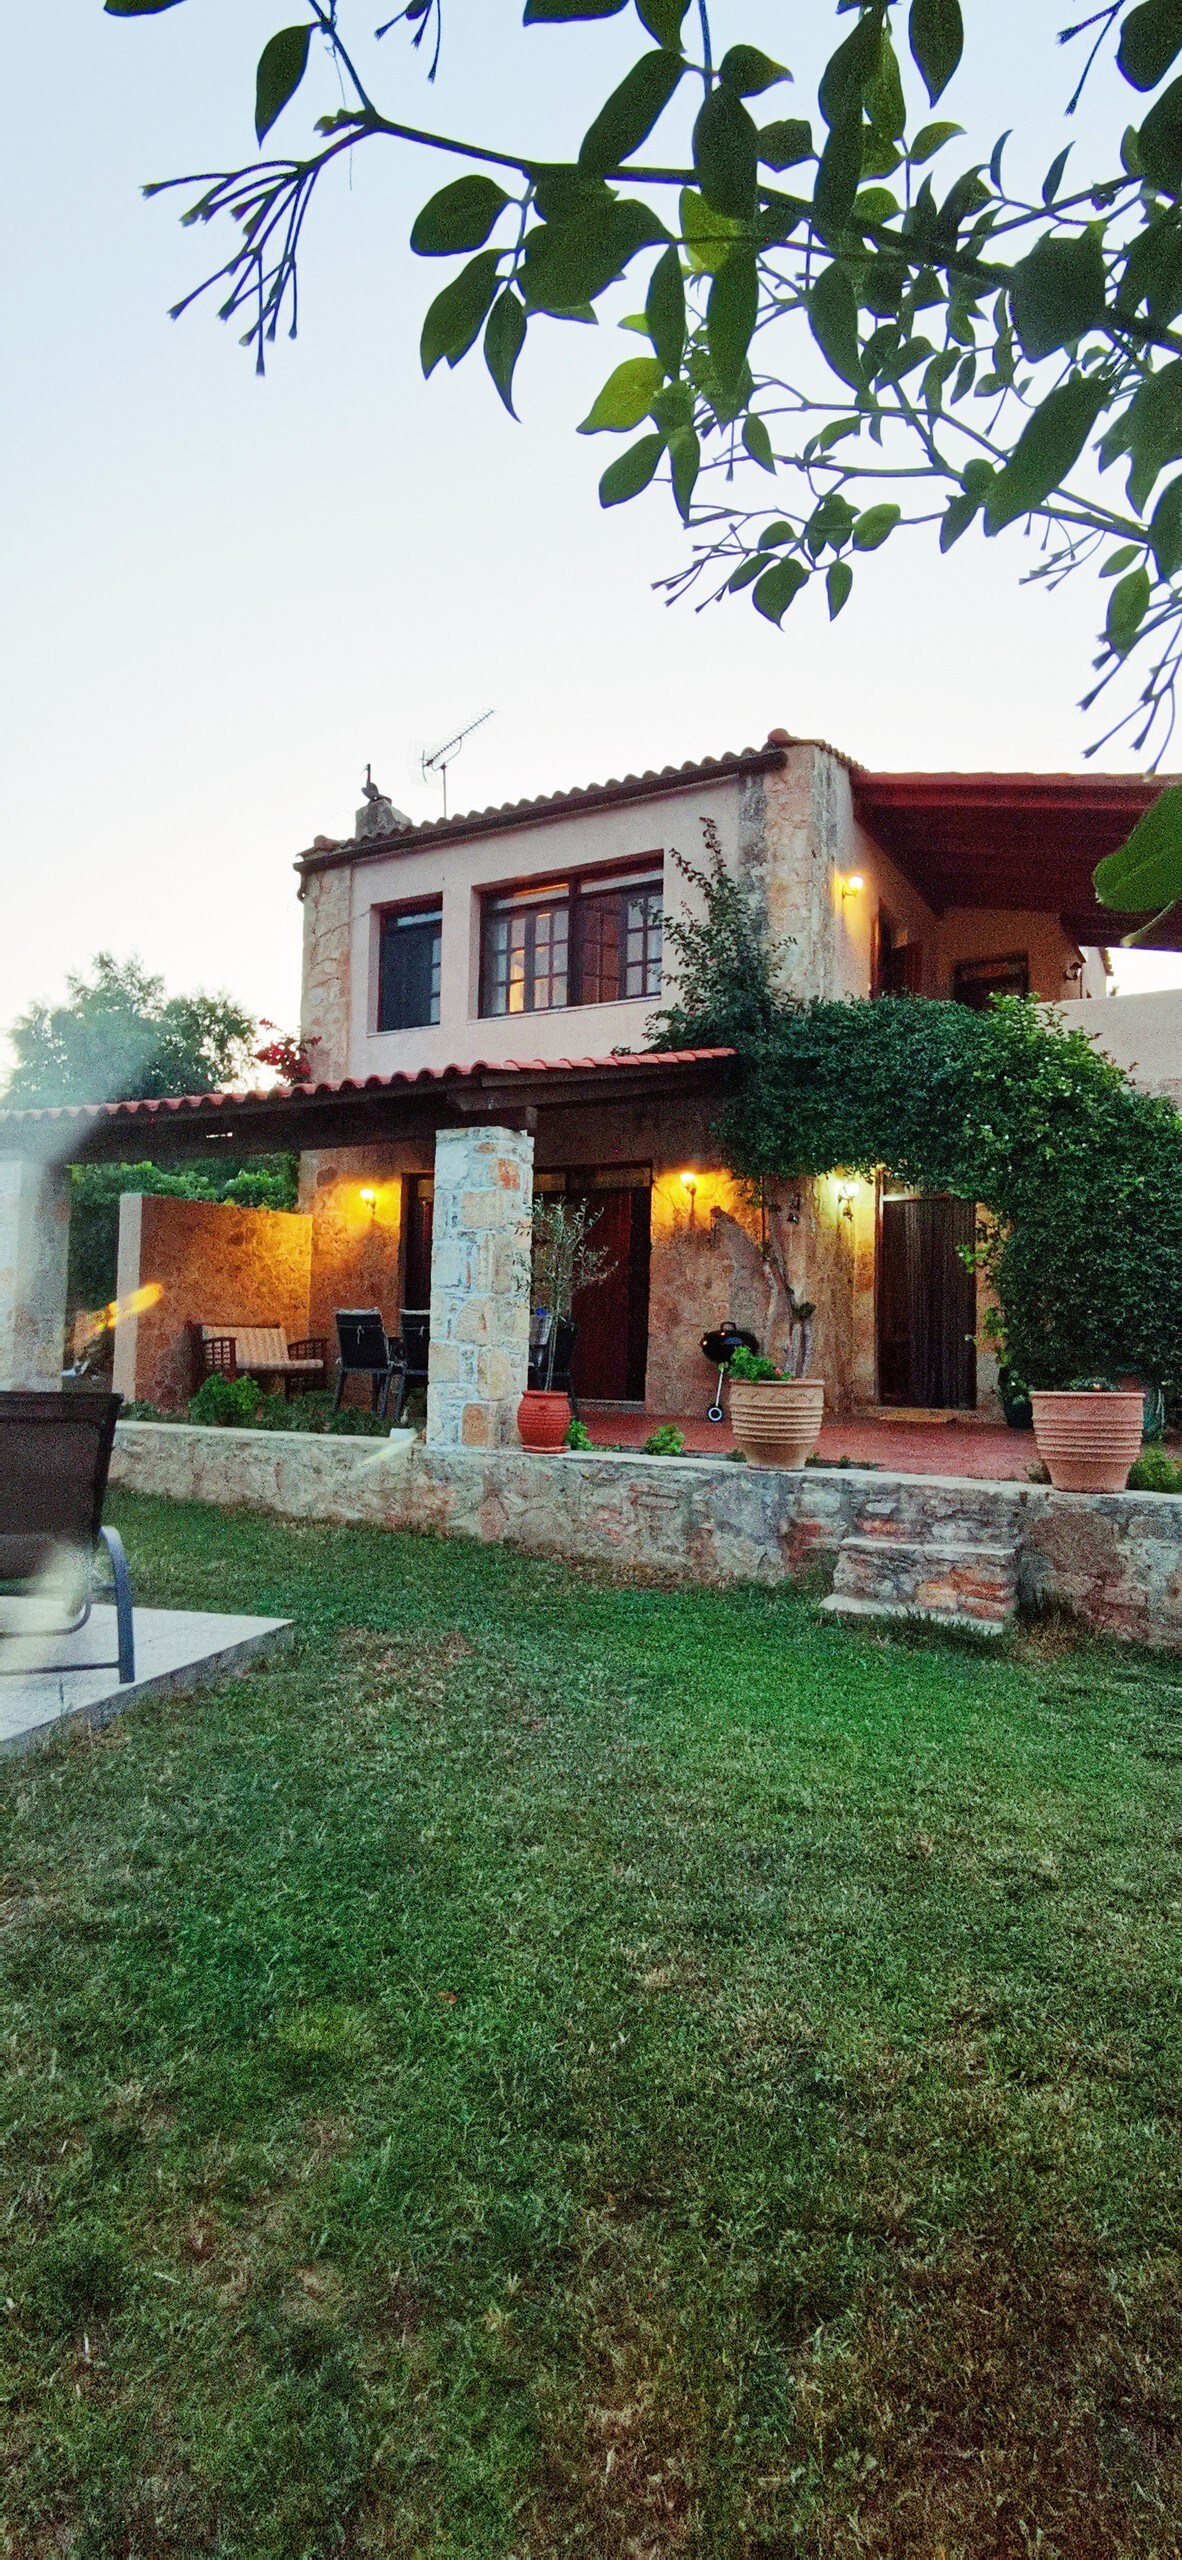 Villa Skine with private pool and garden